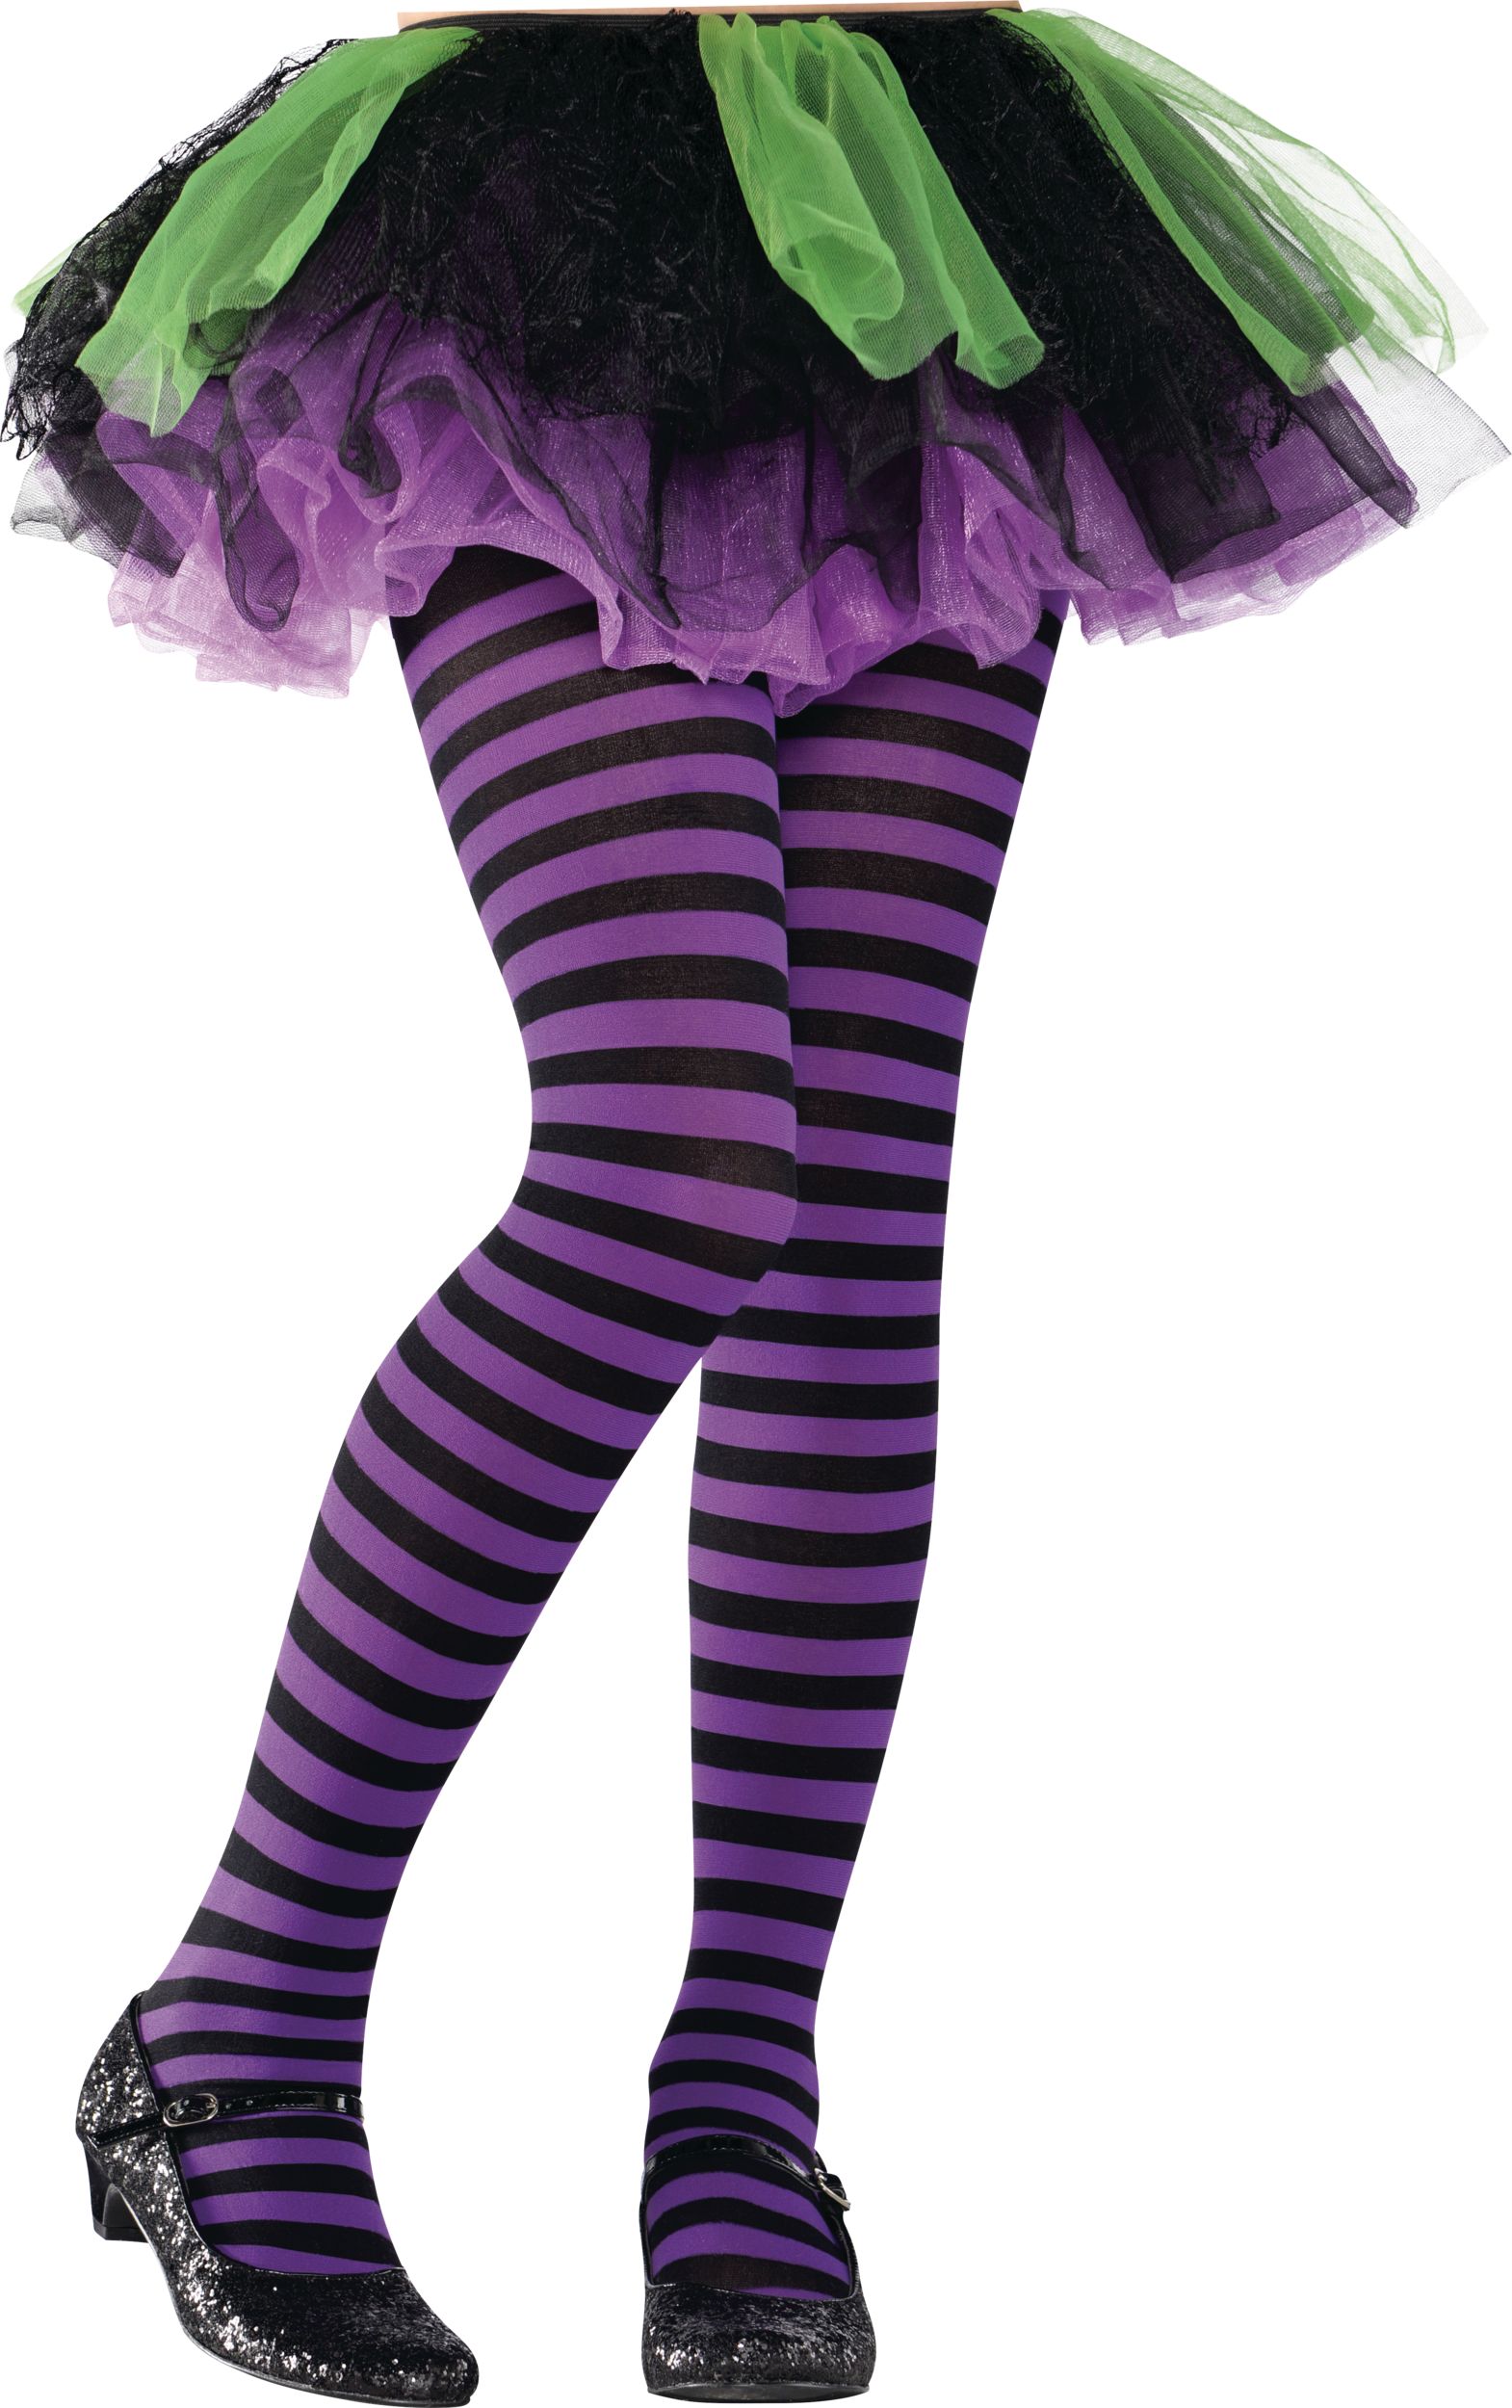 https://media-www.partycity.ca/product/seasonal-gardening/party-city-seasonal/party-city-halloween-and-fall-decor/8519510/child-purple-and-black-striped-tights-817a8bc2-5a73-4967-8e03-f103ab2d49b0-jpgrendition.jpg